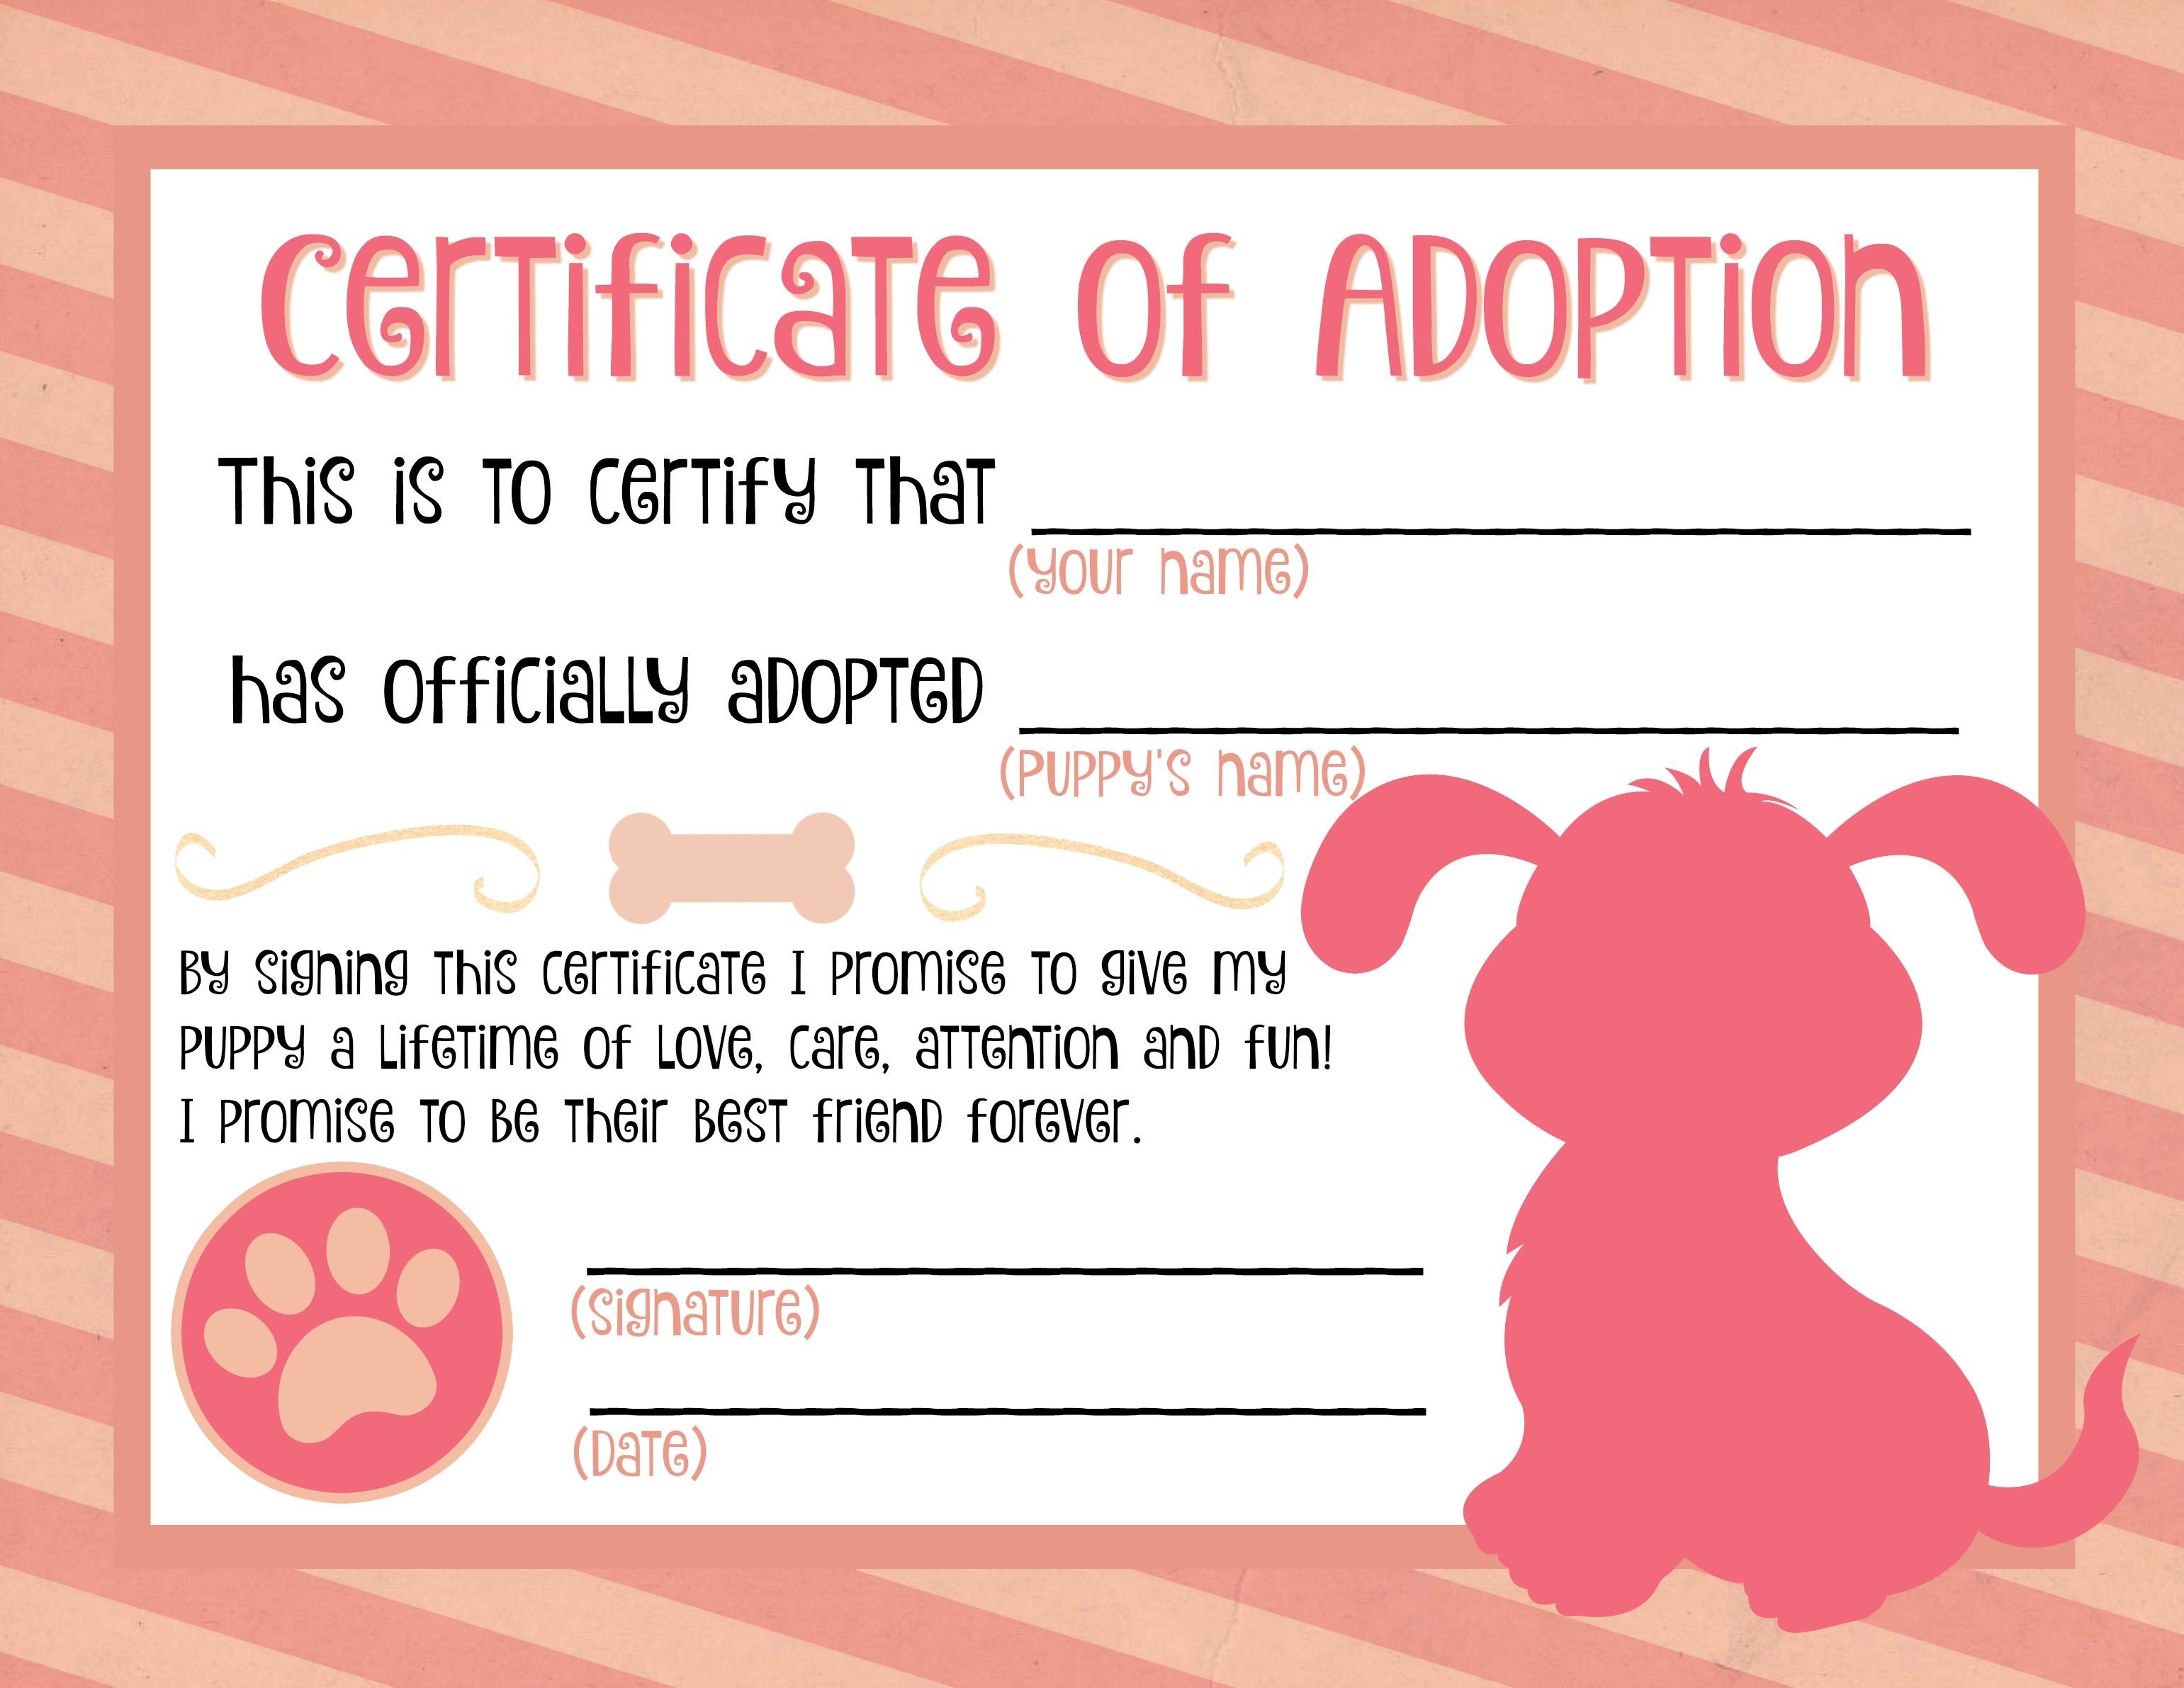 Puppy Adoption Certificate … | Party Ideas In 2019… - Fake Adoption Certificate Free Printable